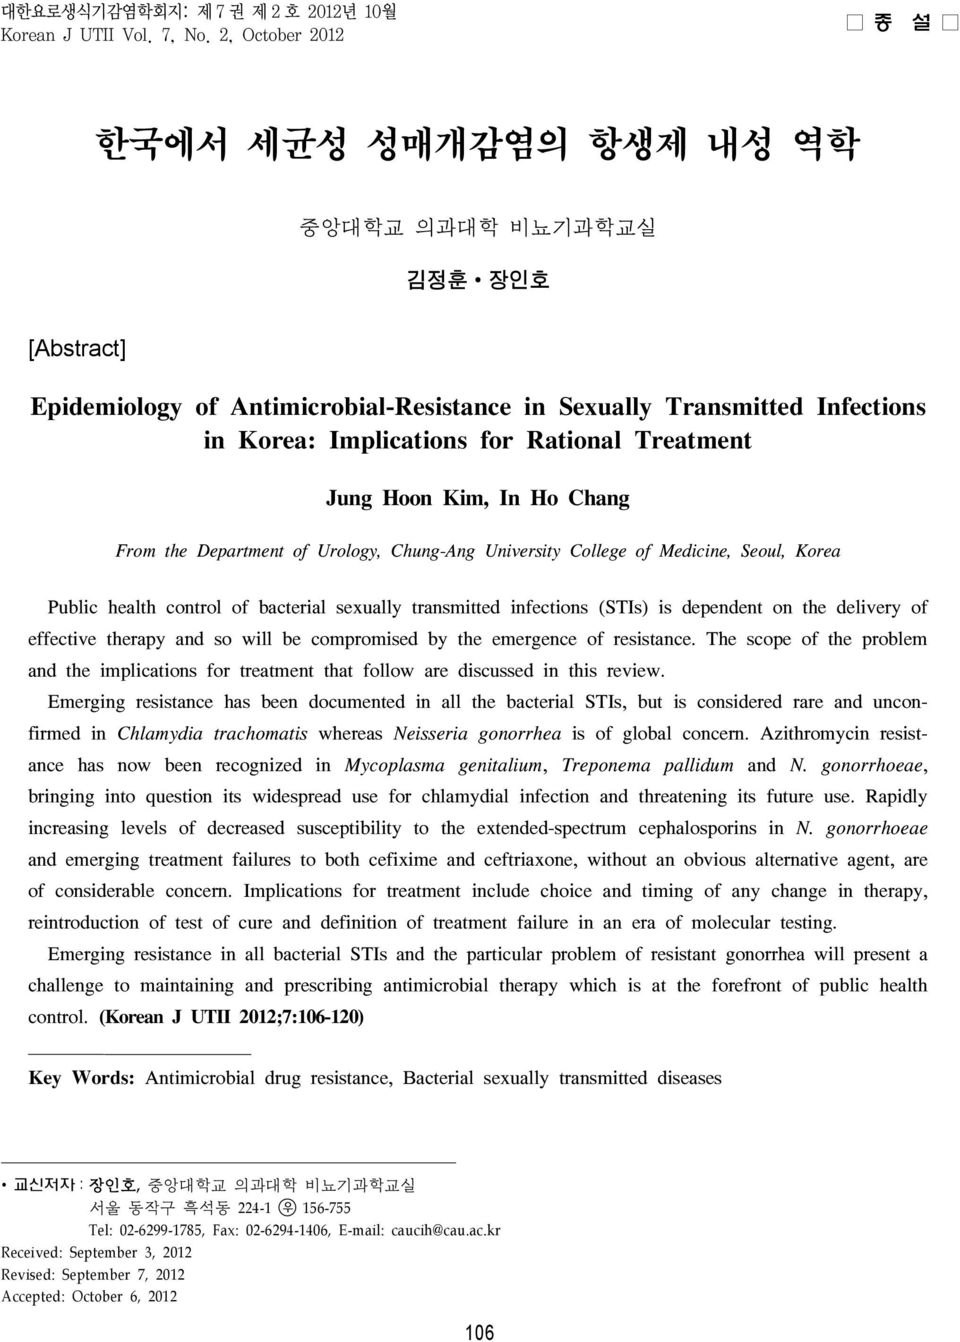 Treatment Jung Hoon Kim, In Ho Chang From the Department of Urology, Chung-Ang University College of Medicine, Seoul, Korea Public health control of bacterial sexually transmitted infections (STIs)